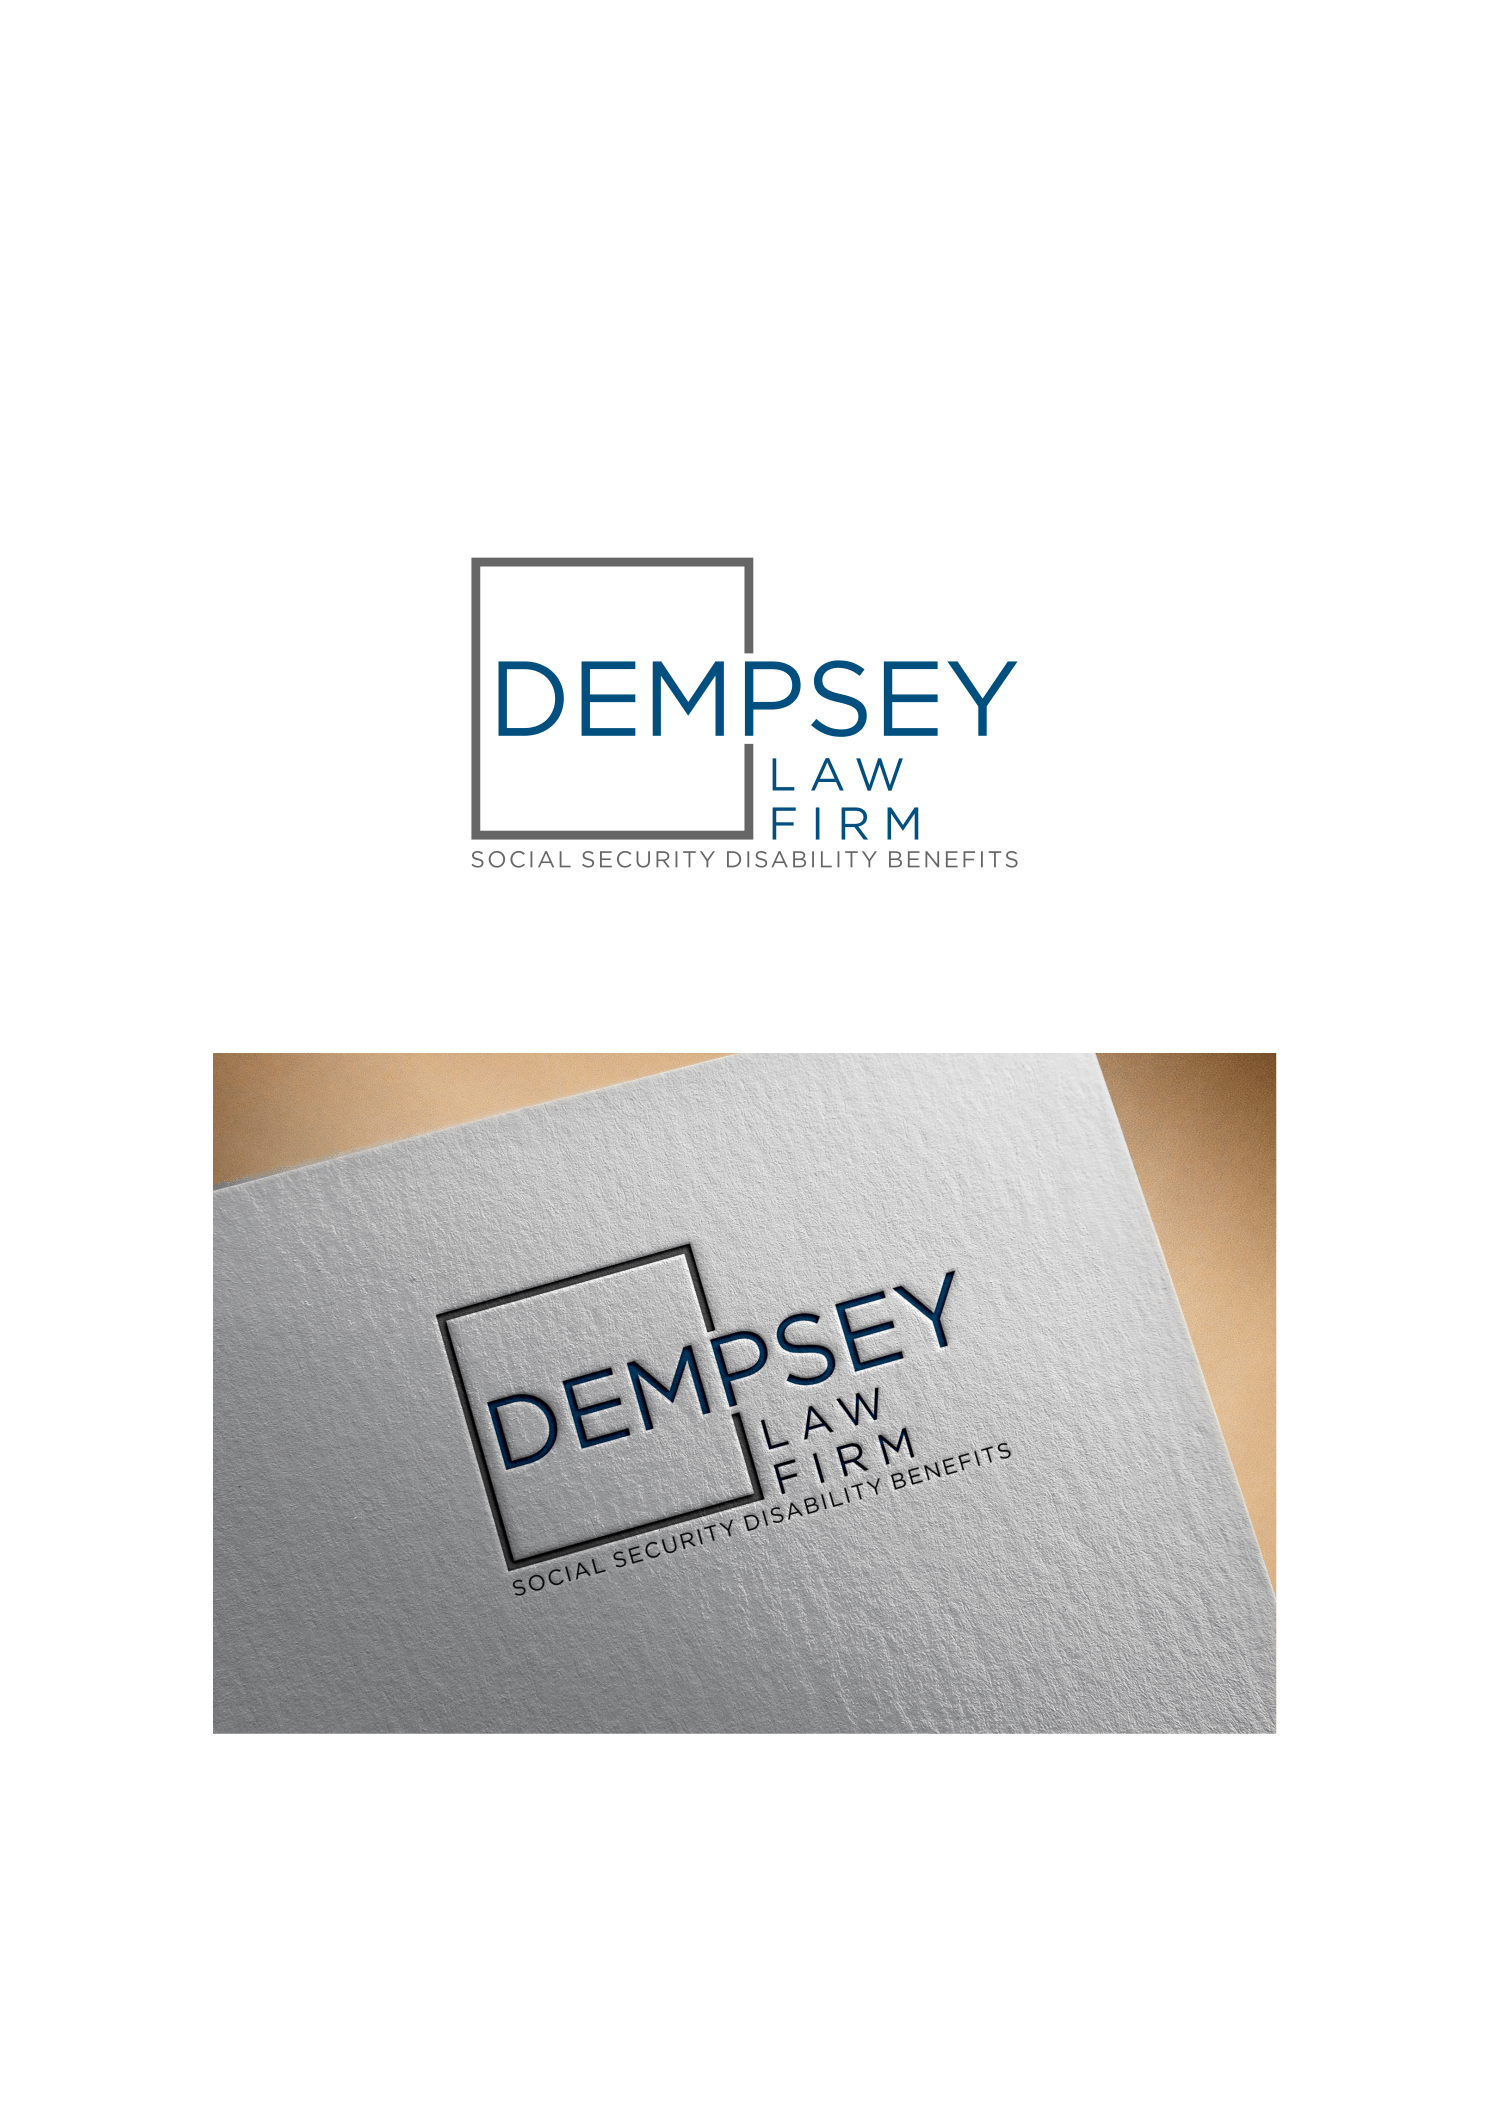 Generic Square Logo - Generic & overused logo designs sold - DEMPSEY LAW FIRM … | Logotype ...